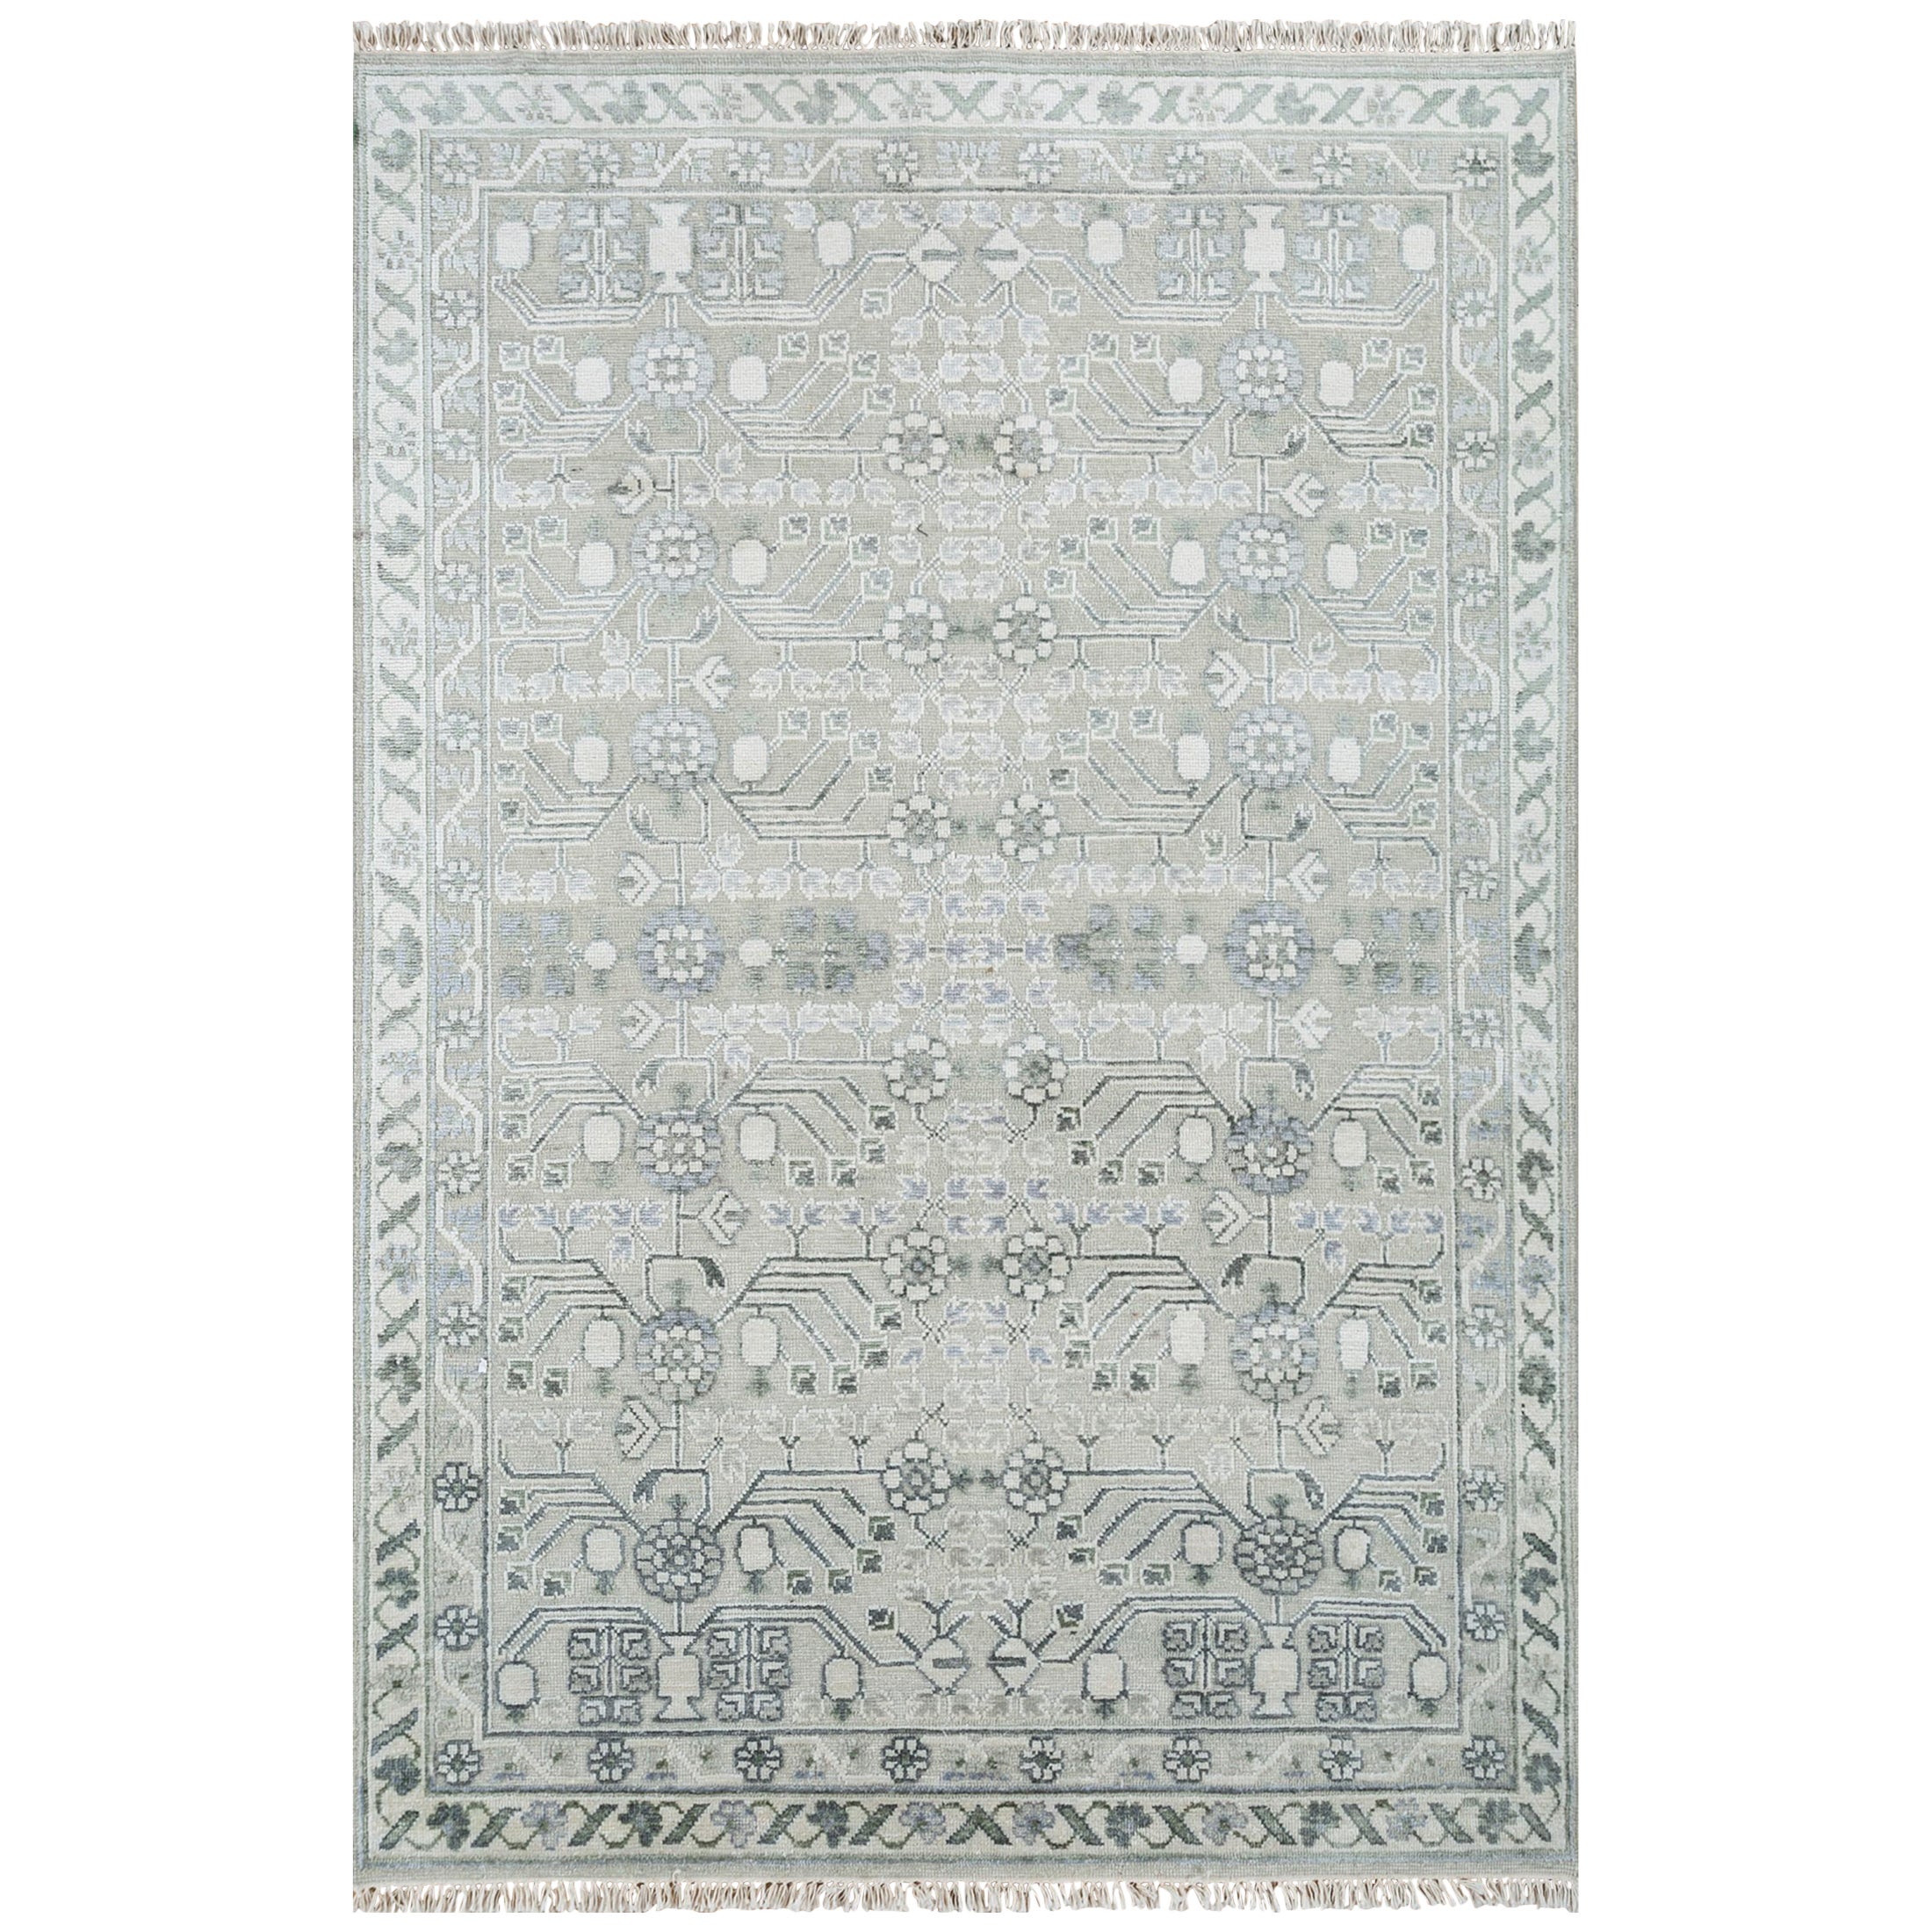 Tranquil Sky Mosaic Blue Haze Undyed White 180X270 cm Hand-Knotted Rug